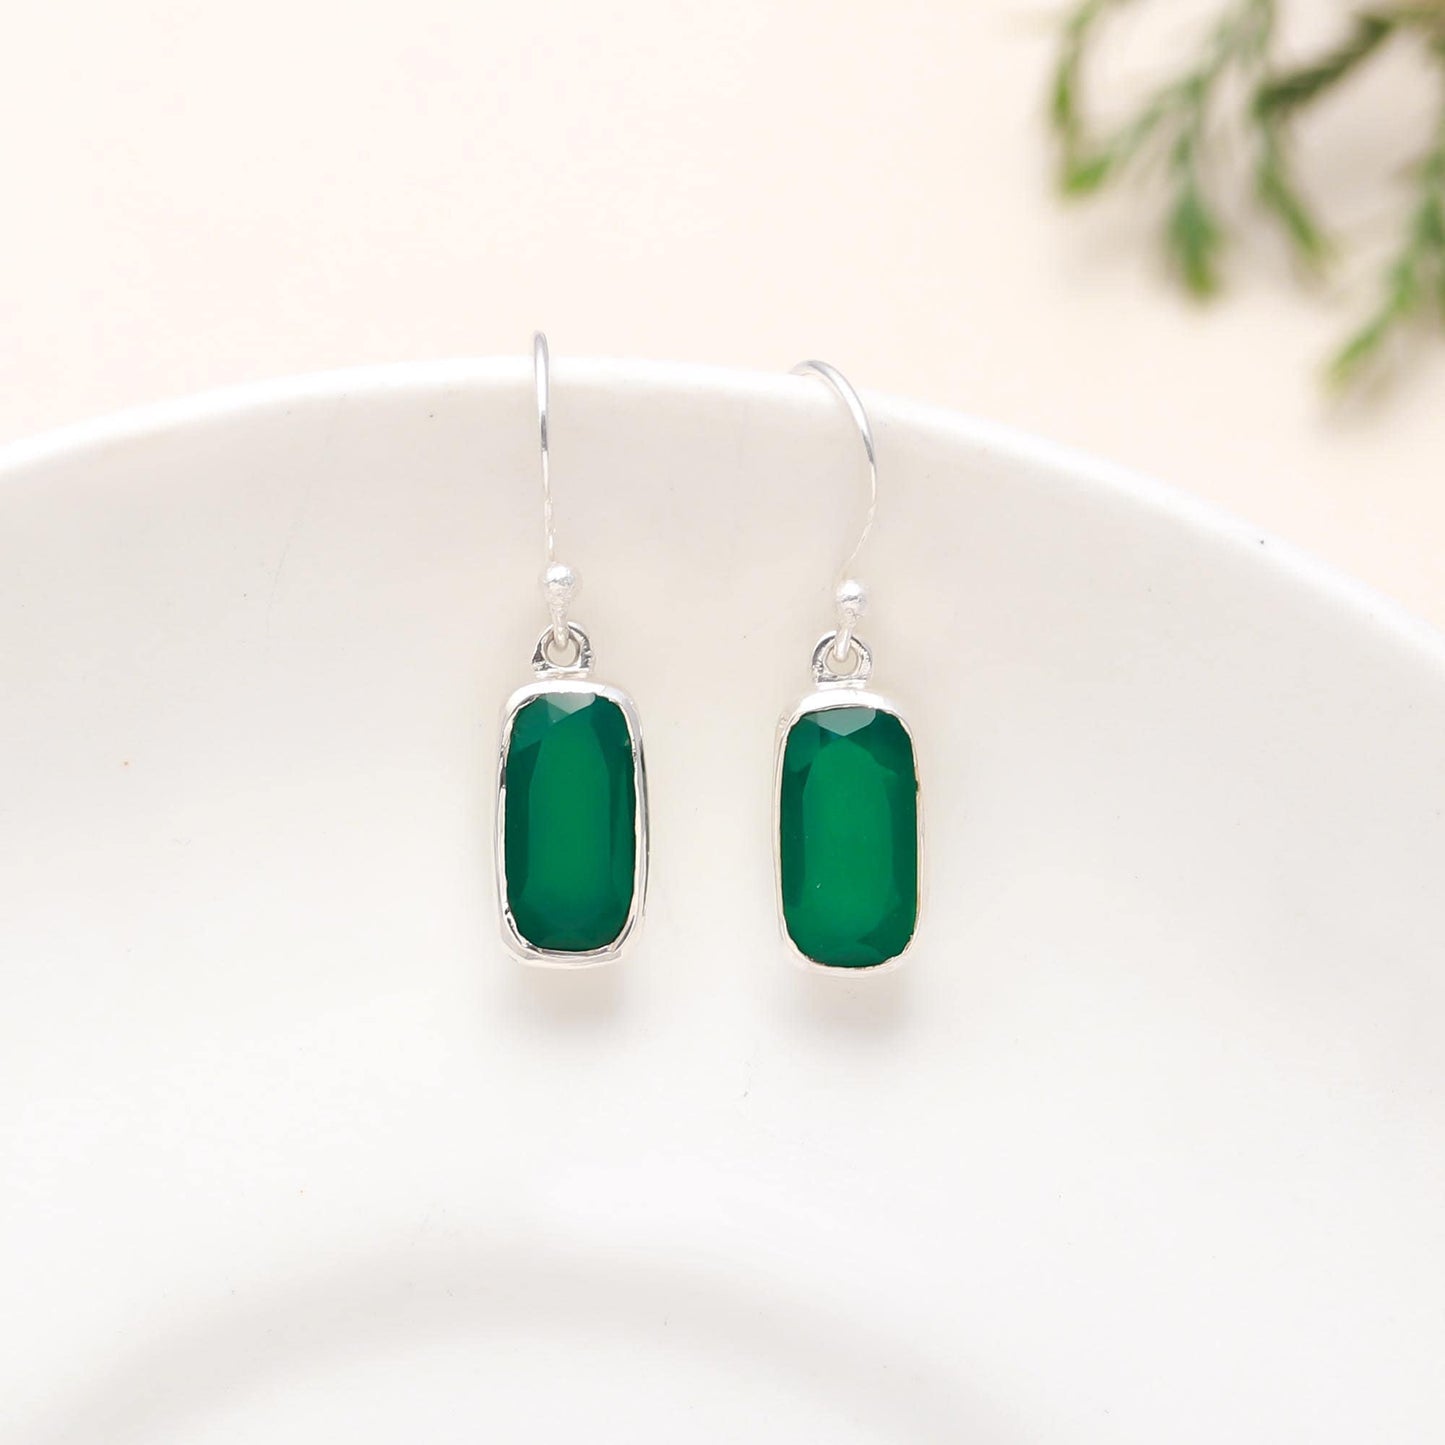 Solid 925 Sterling Silver Green Onyx Emerald Earring with Dangle Earwire. Handmade, Wedding /Anniversary & Birthday Gift for her. Woman/Girl